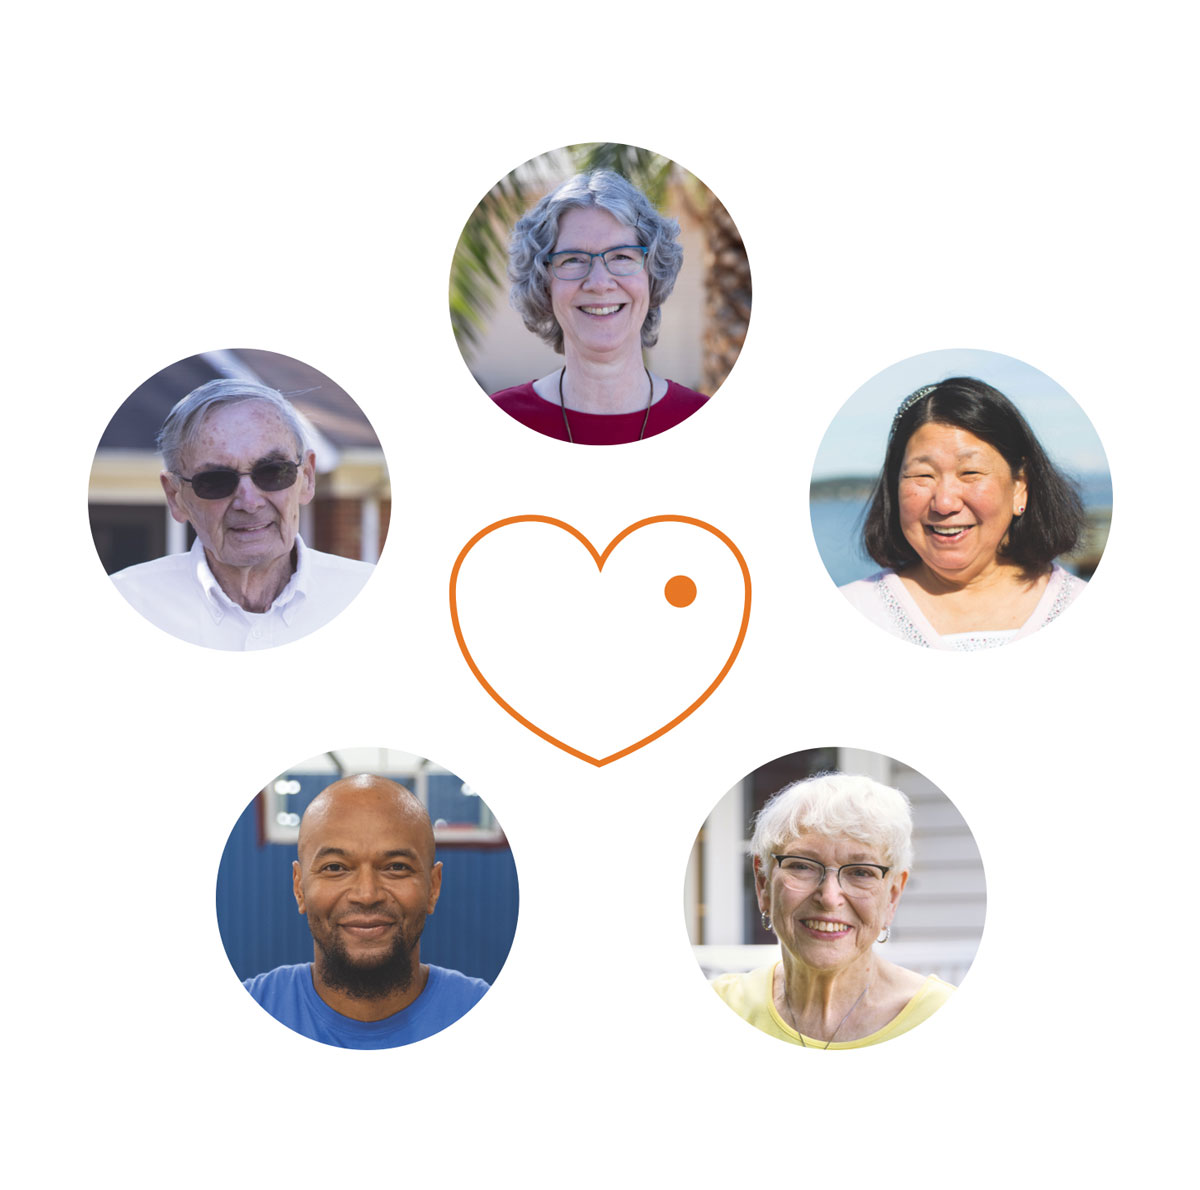 images of five diverse people surrounding an orange heart icon.